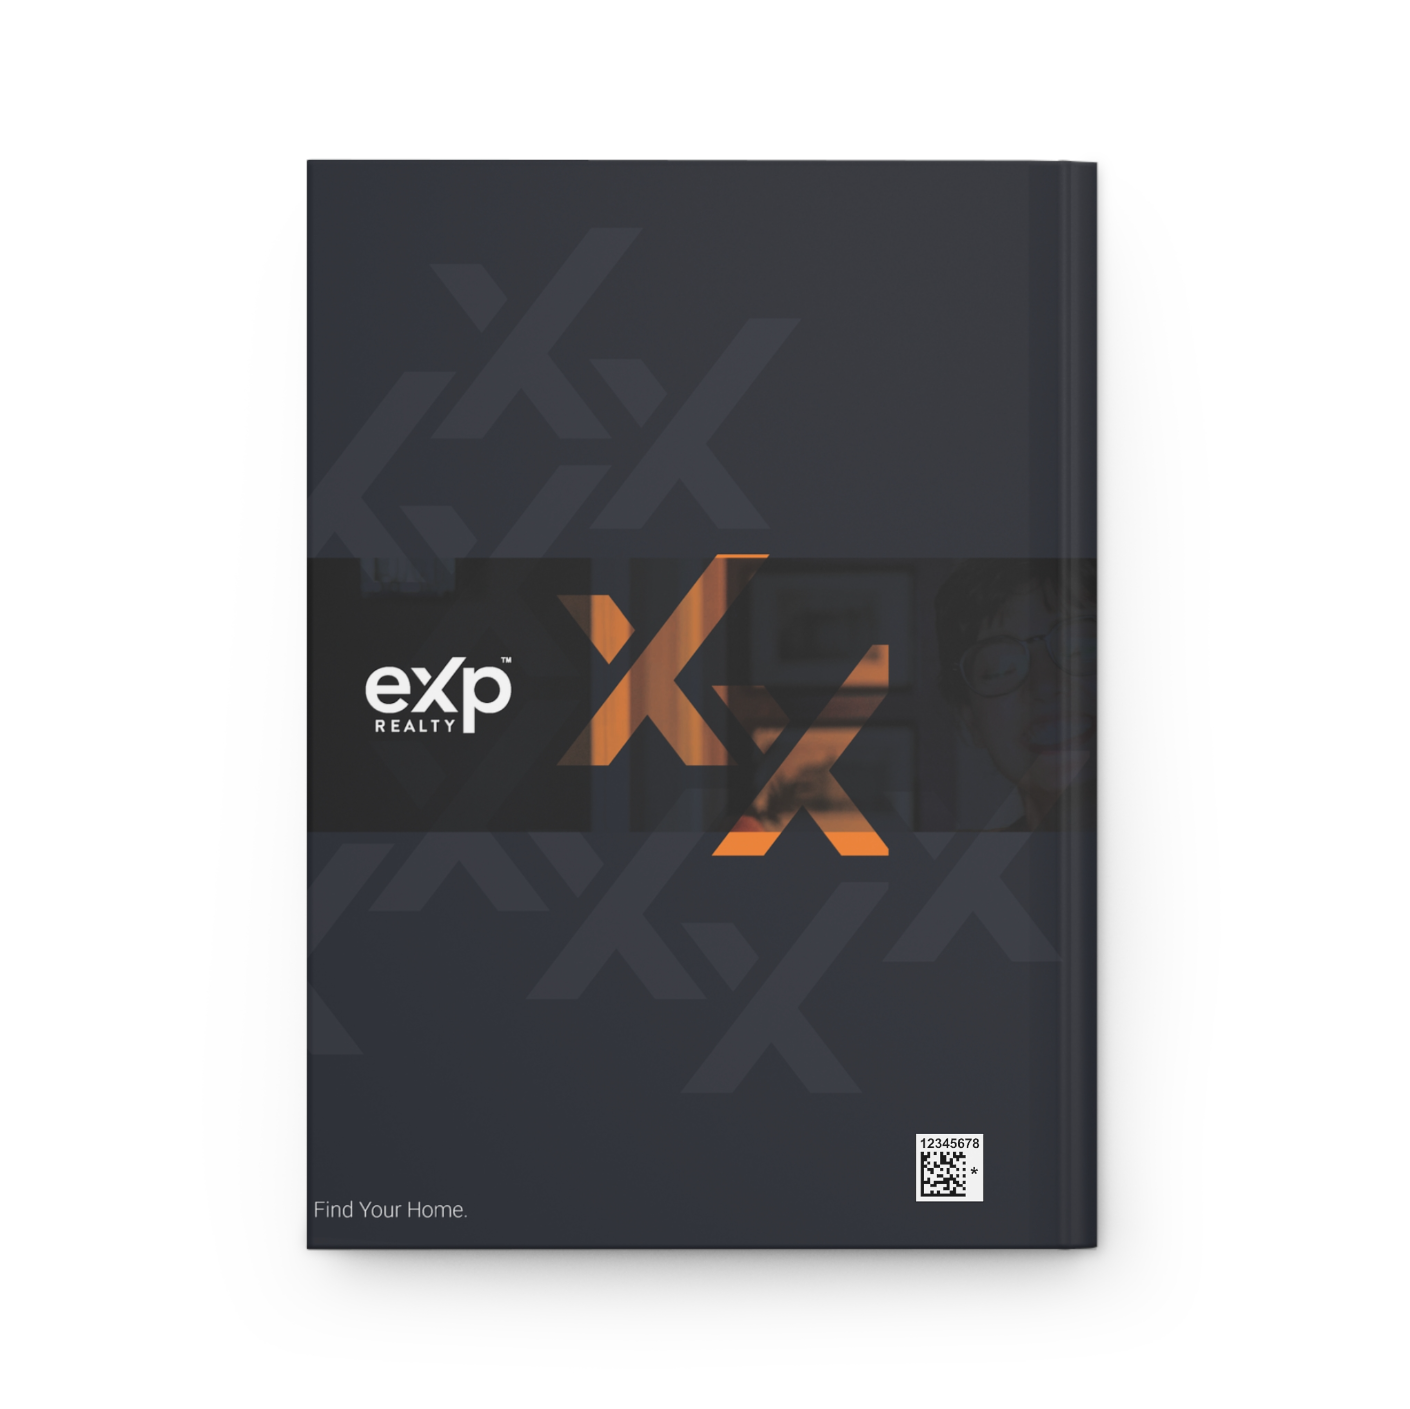 eXp Full Color Hardcover Binders Orange Opaque xx (from as low as $10.46 per cover)